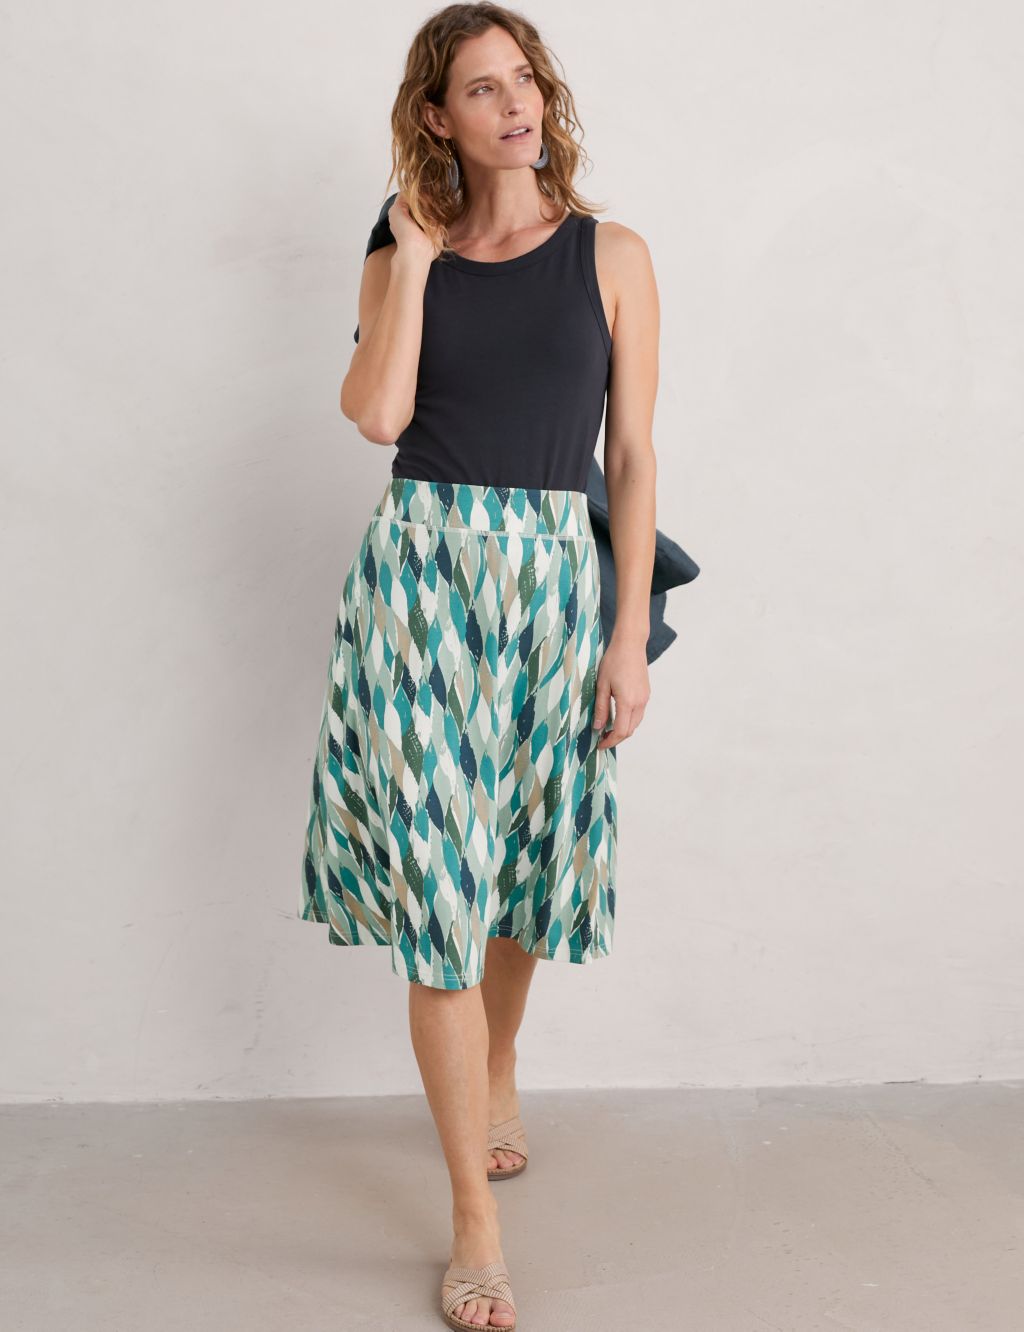 Cotton Rich Printed Knee Length A-Line Skirt